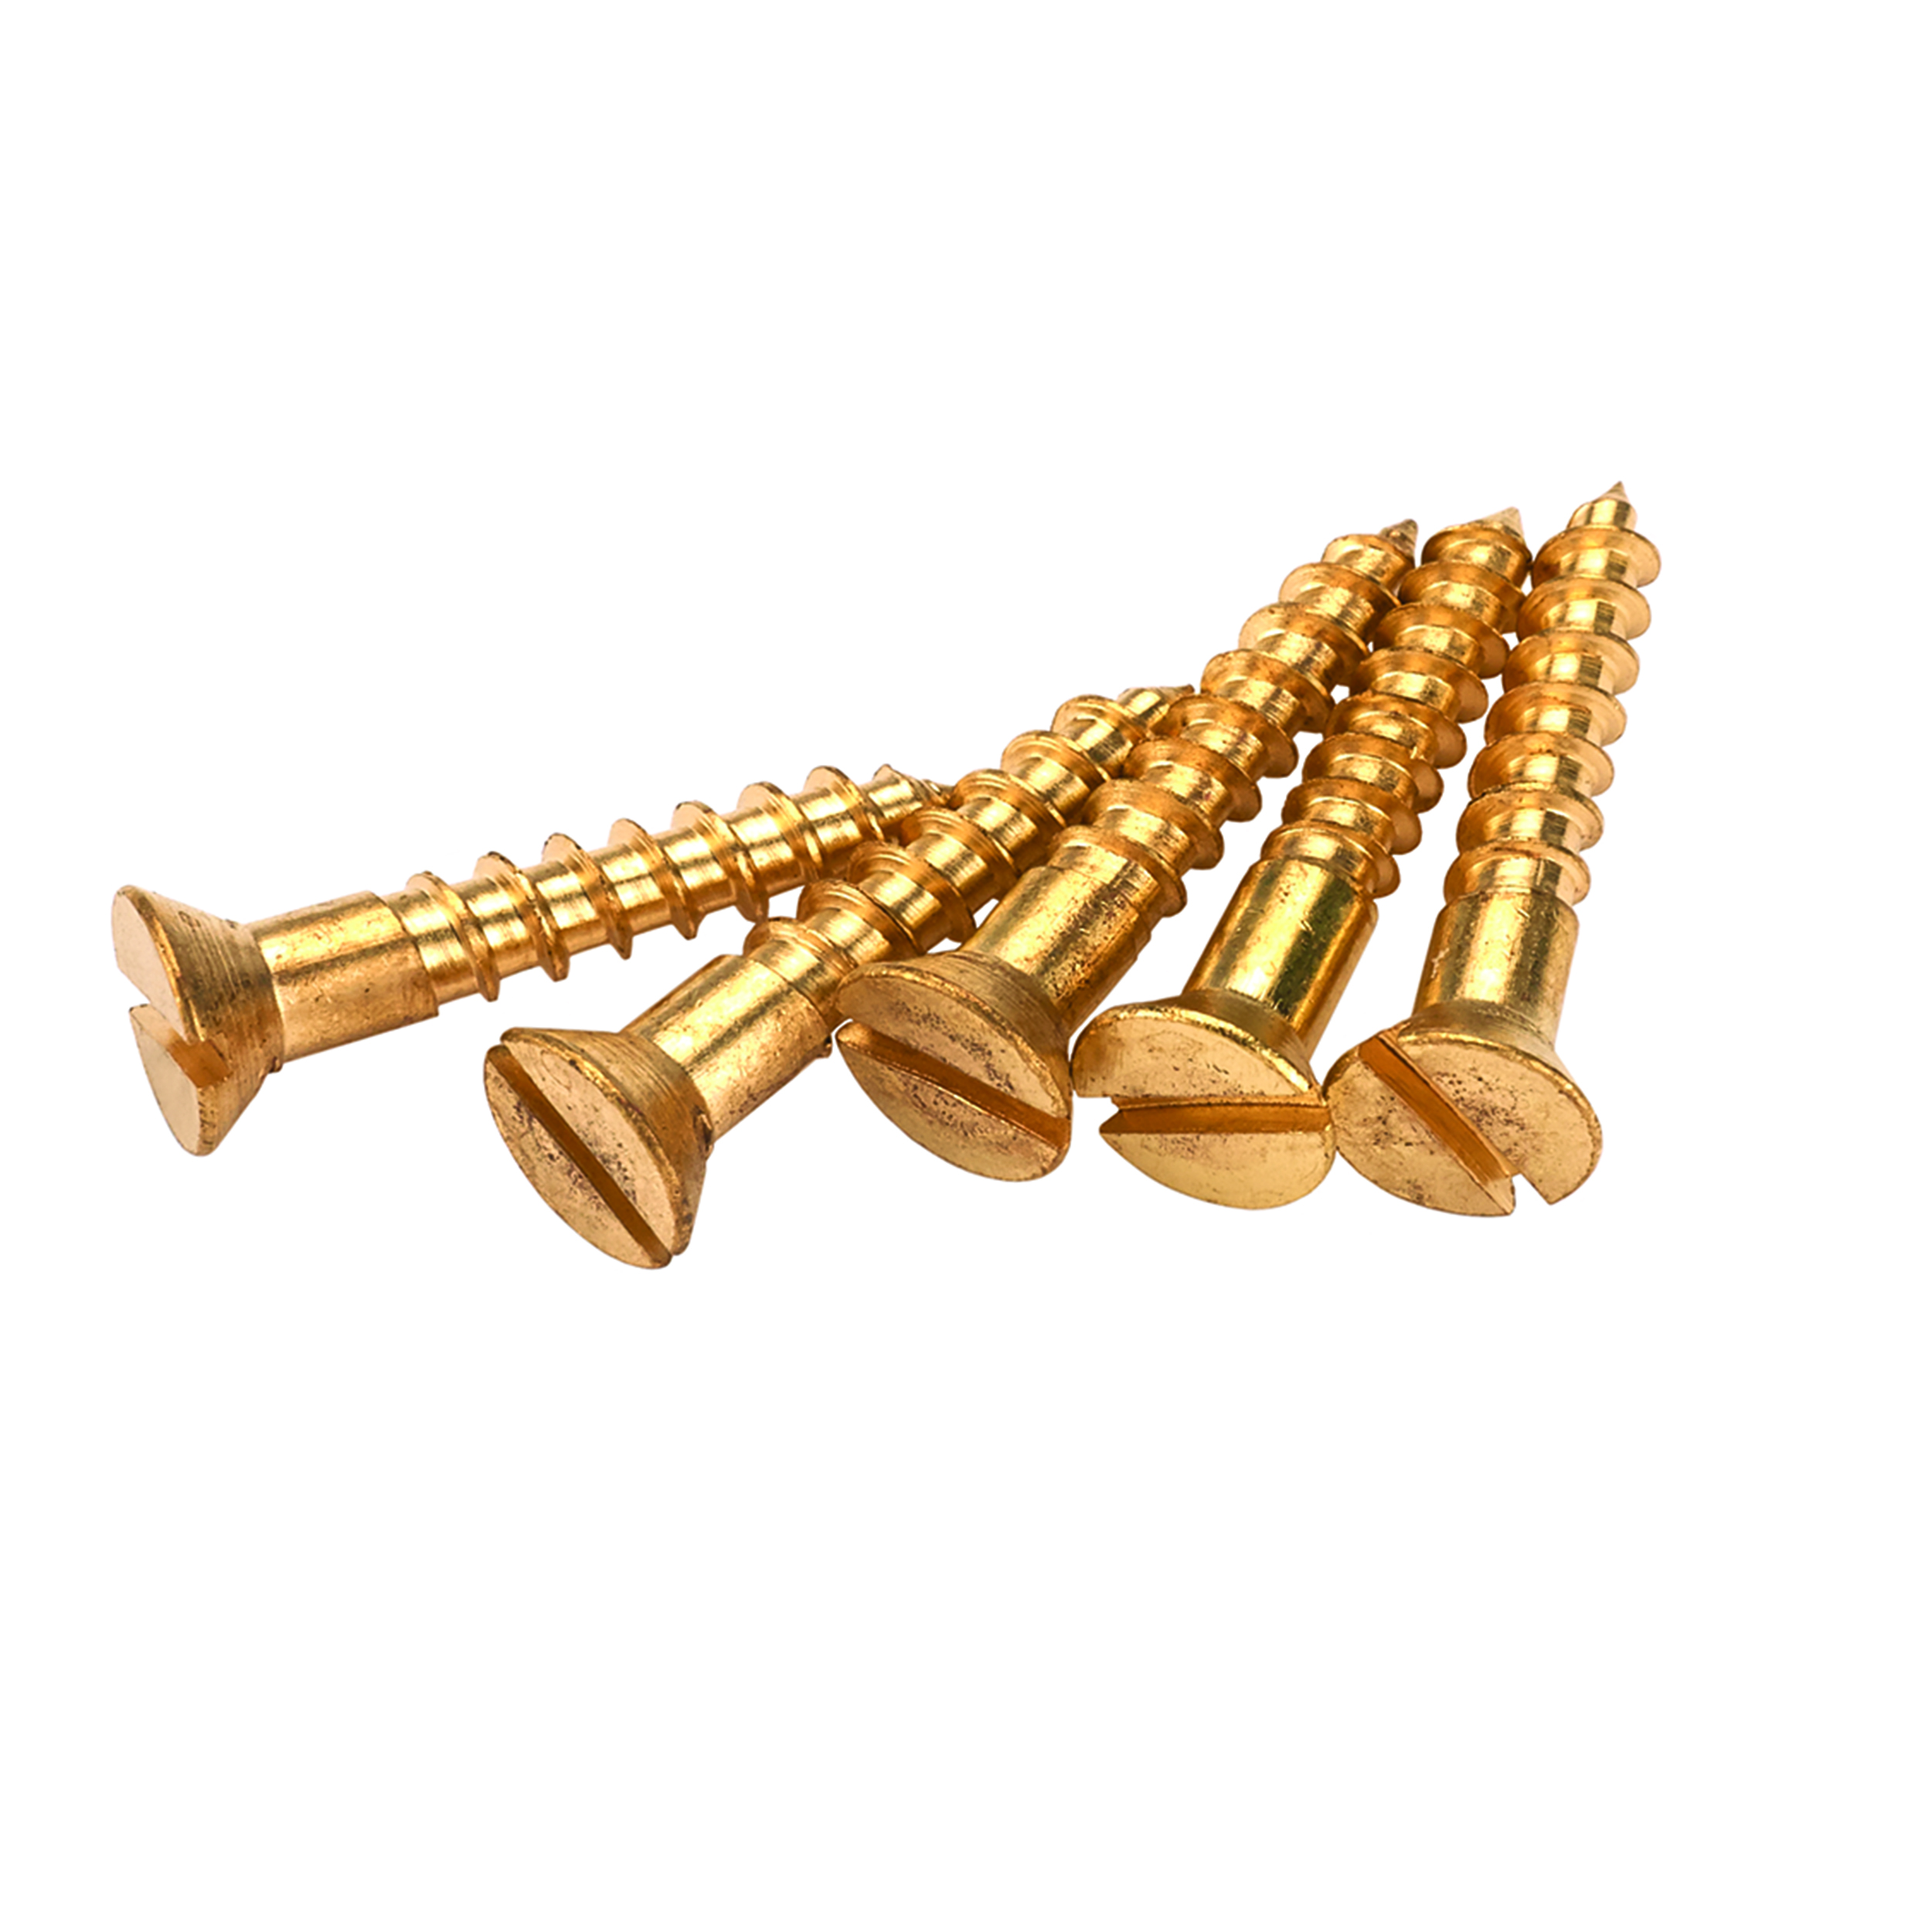 Solid Brass Screws #2 X 5/8" Slotted 25-piece